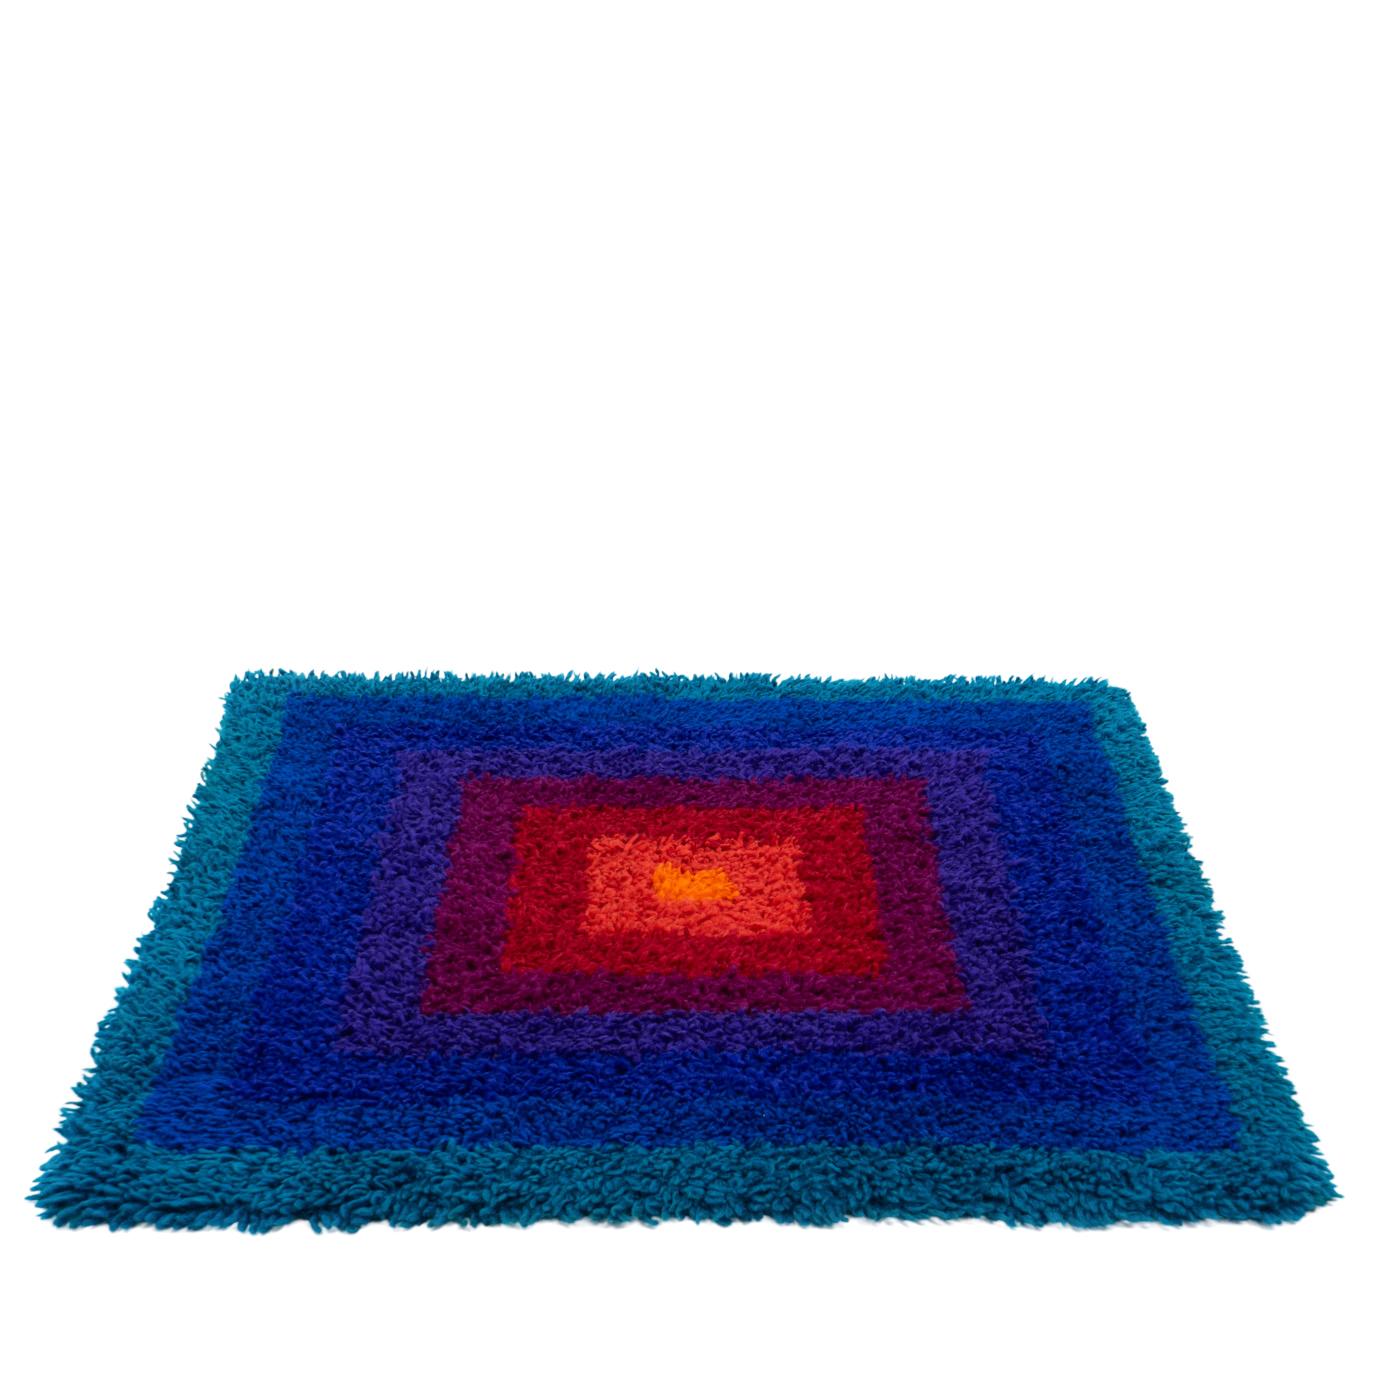 Verner Panton Square Rug, Mira-Carré – Switzerland 1970s In Good Condition For Sale In Renens, CH